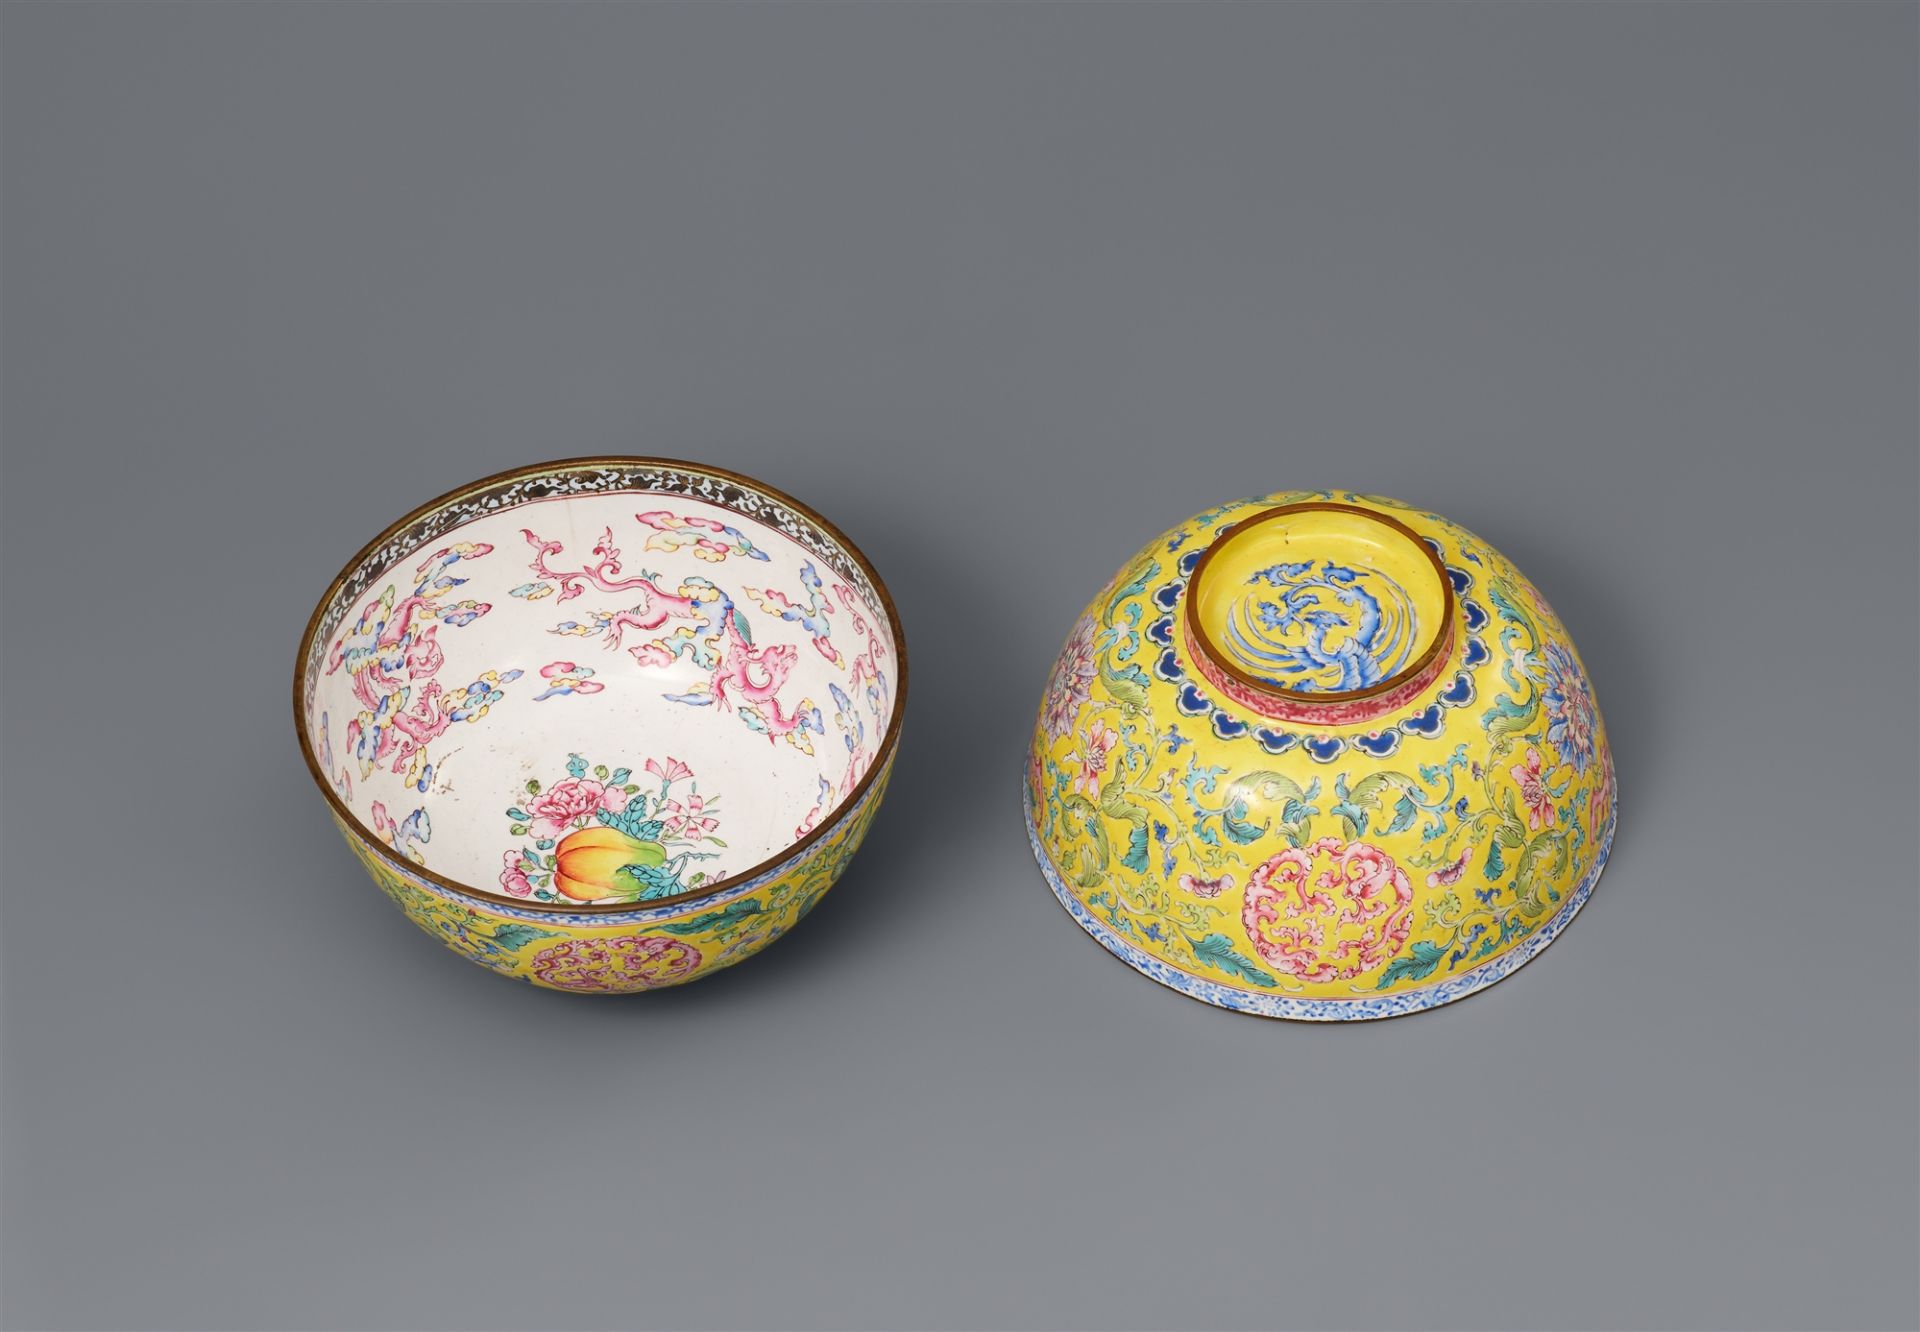 Two painted enamel on copper alloy bowls. Canton. 18th century